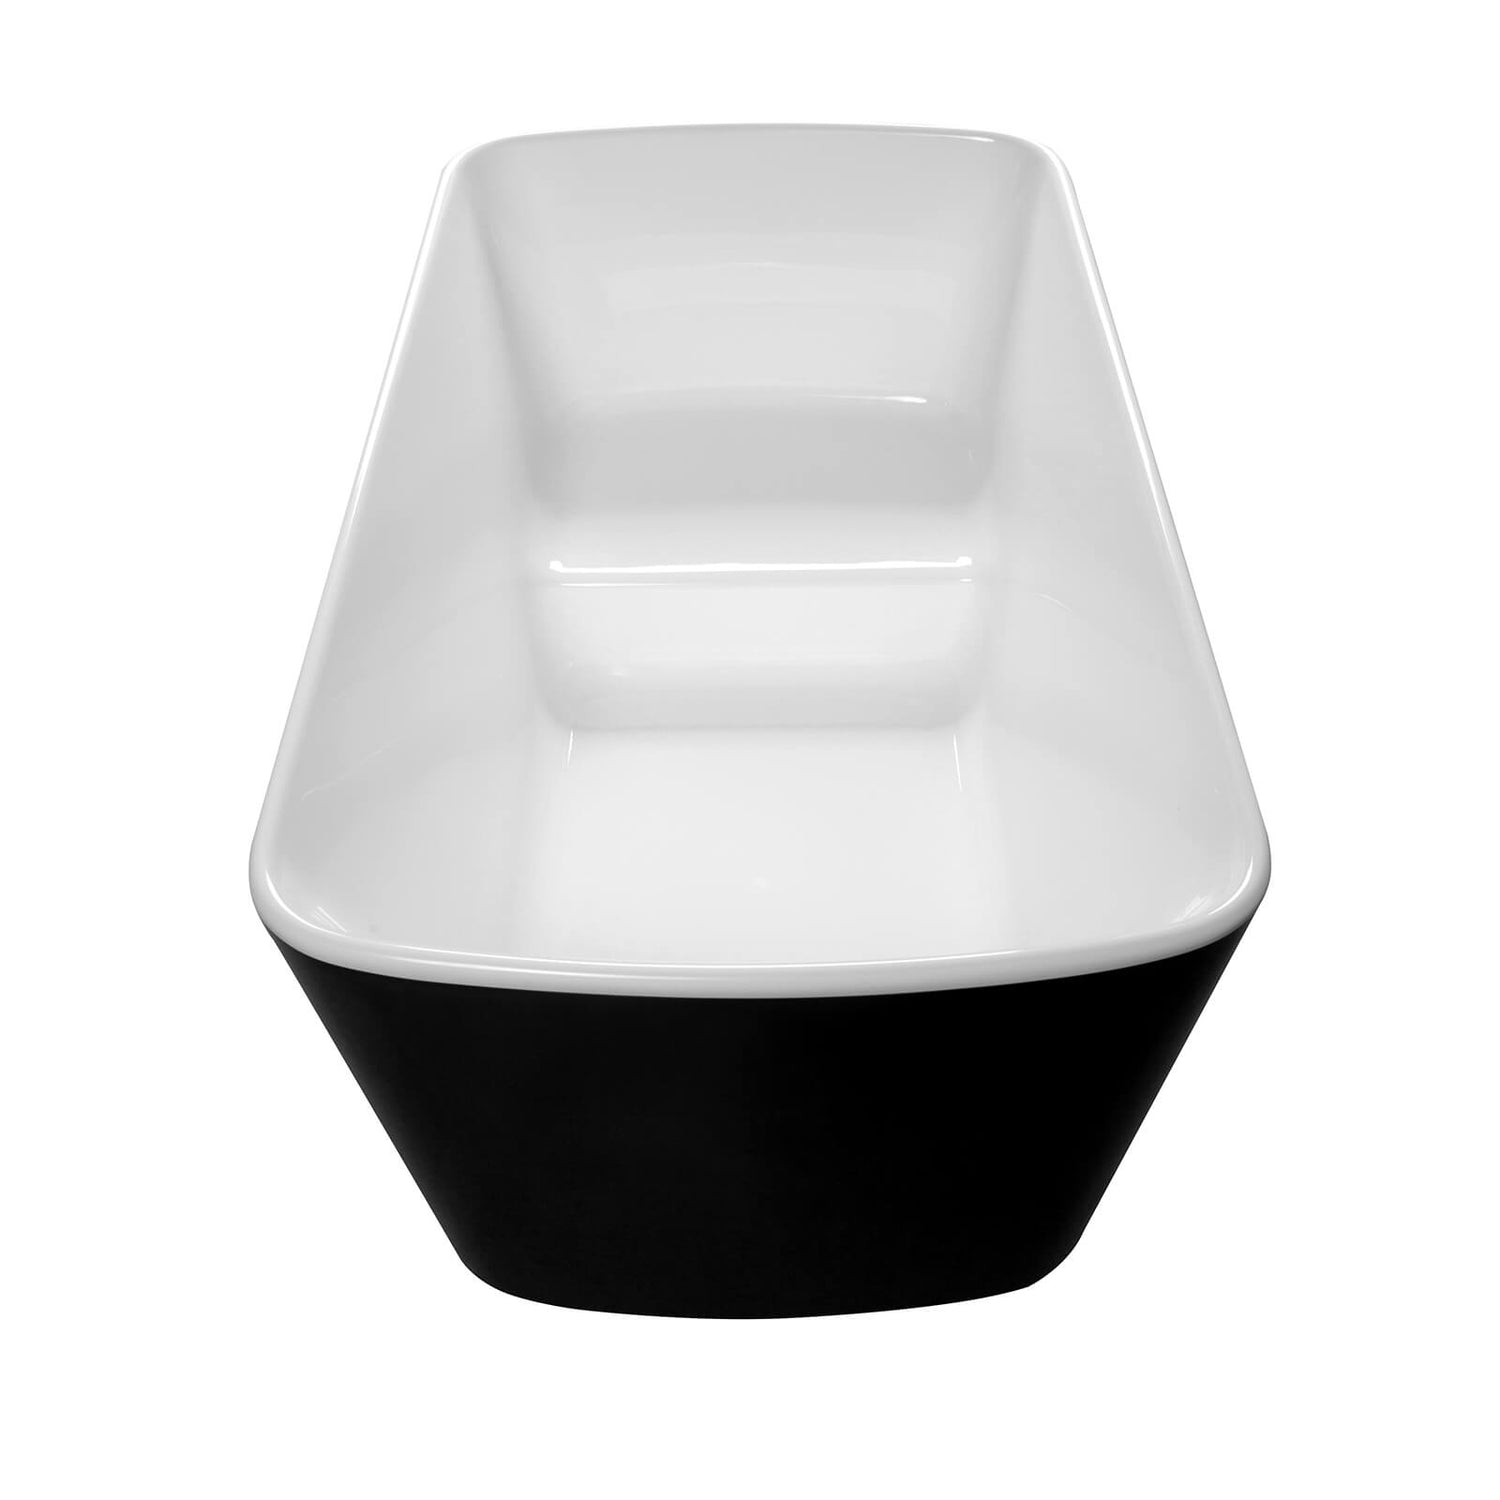 High quality 49 inch small size sit in soaking tub